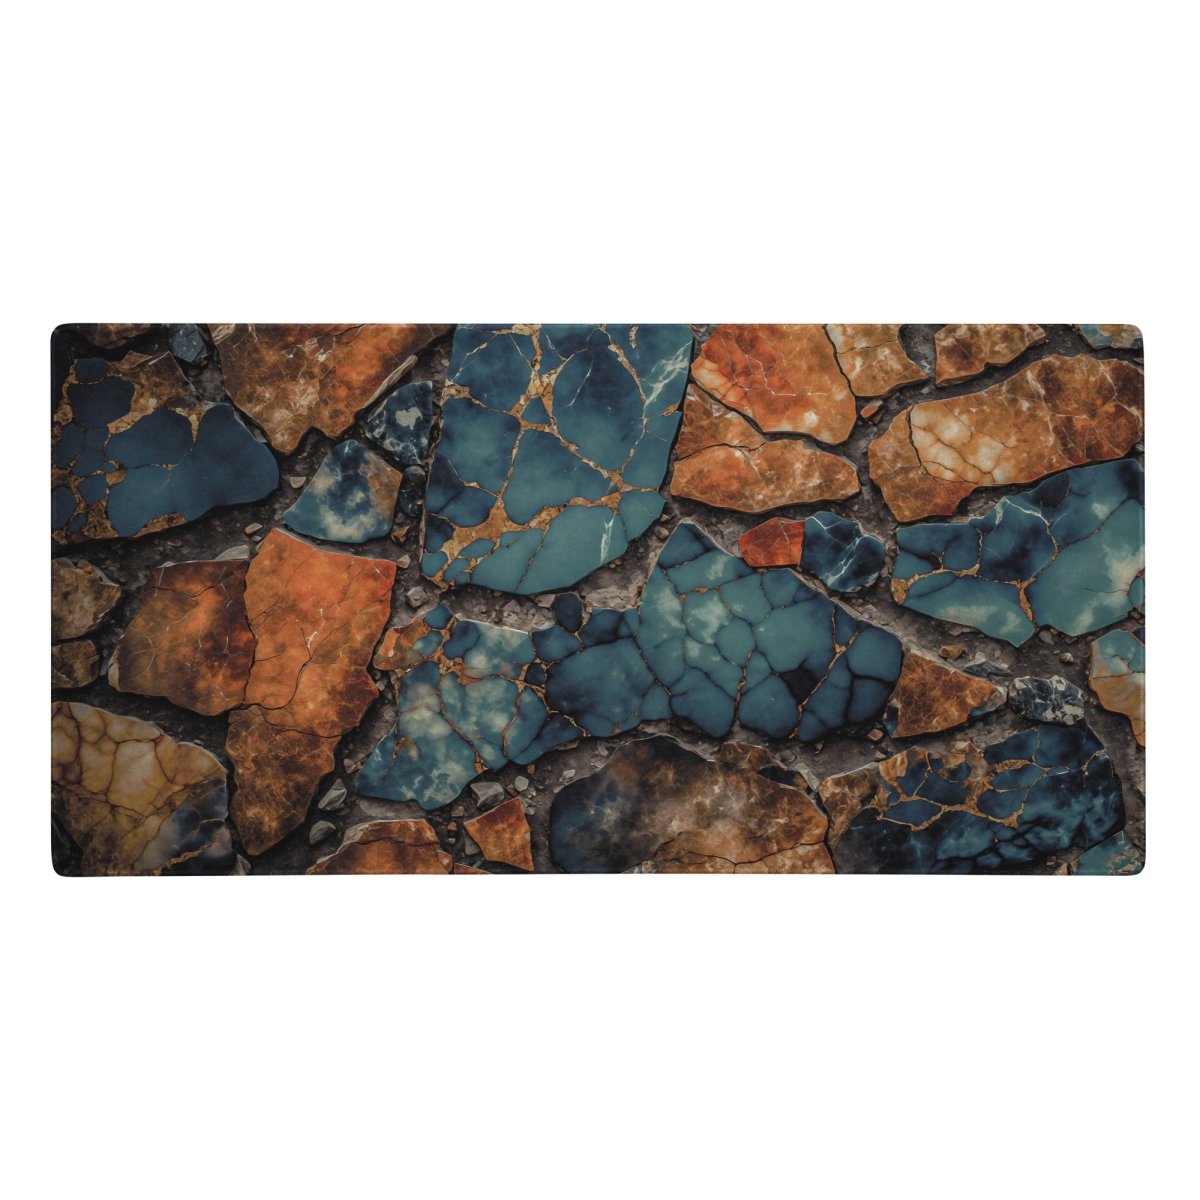 Geode spectrum - Gaming mouse pad - Ever colorful